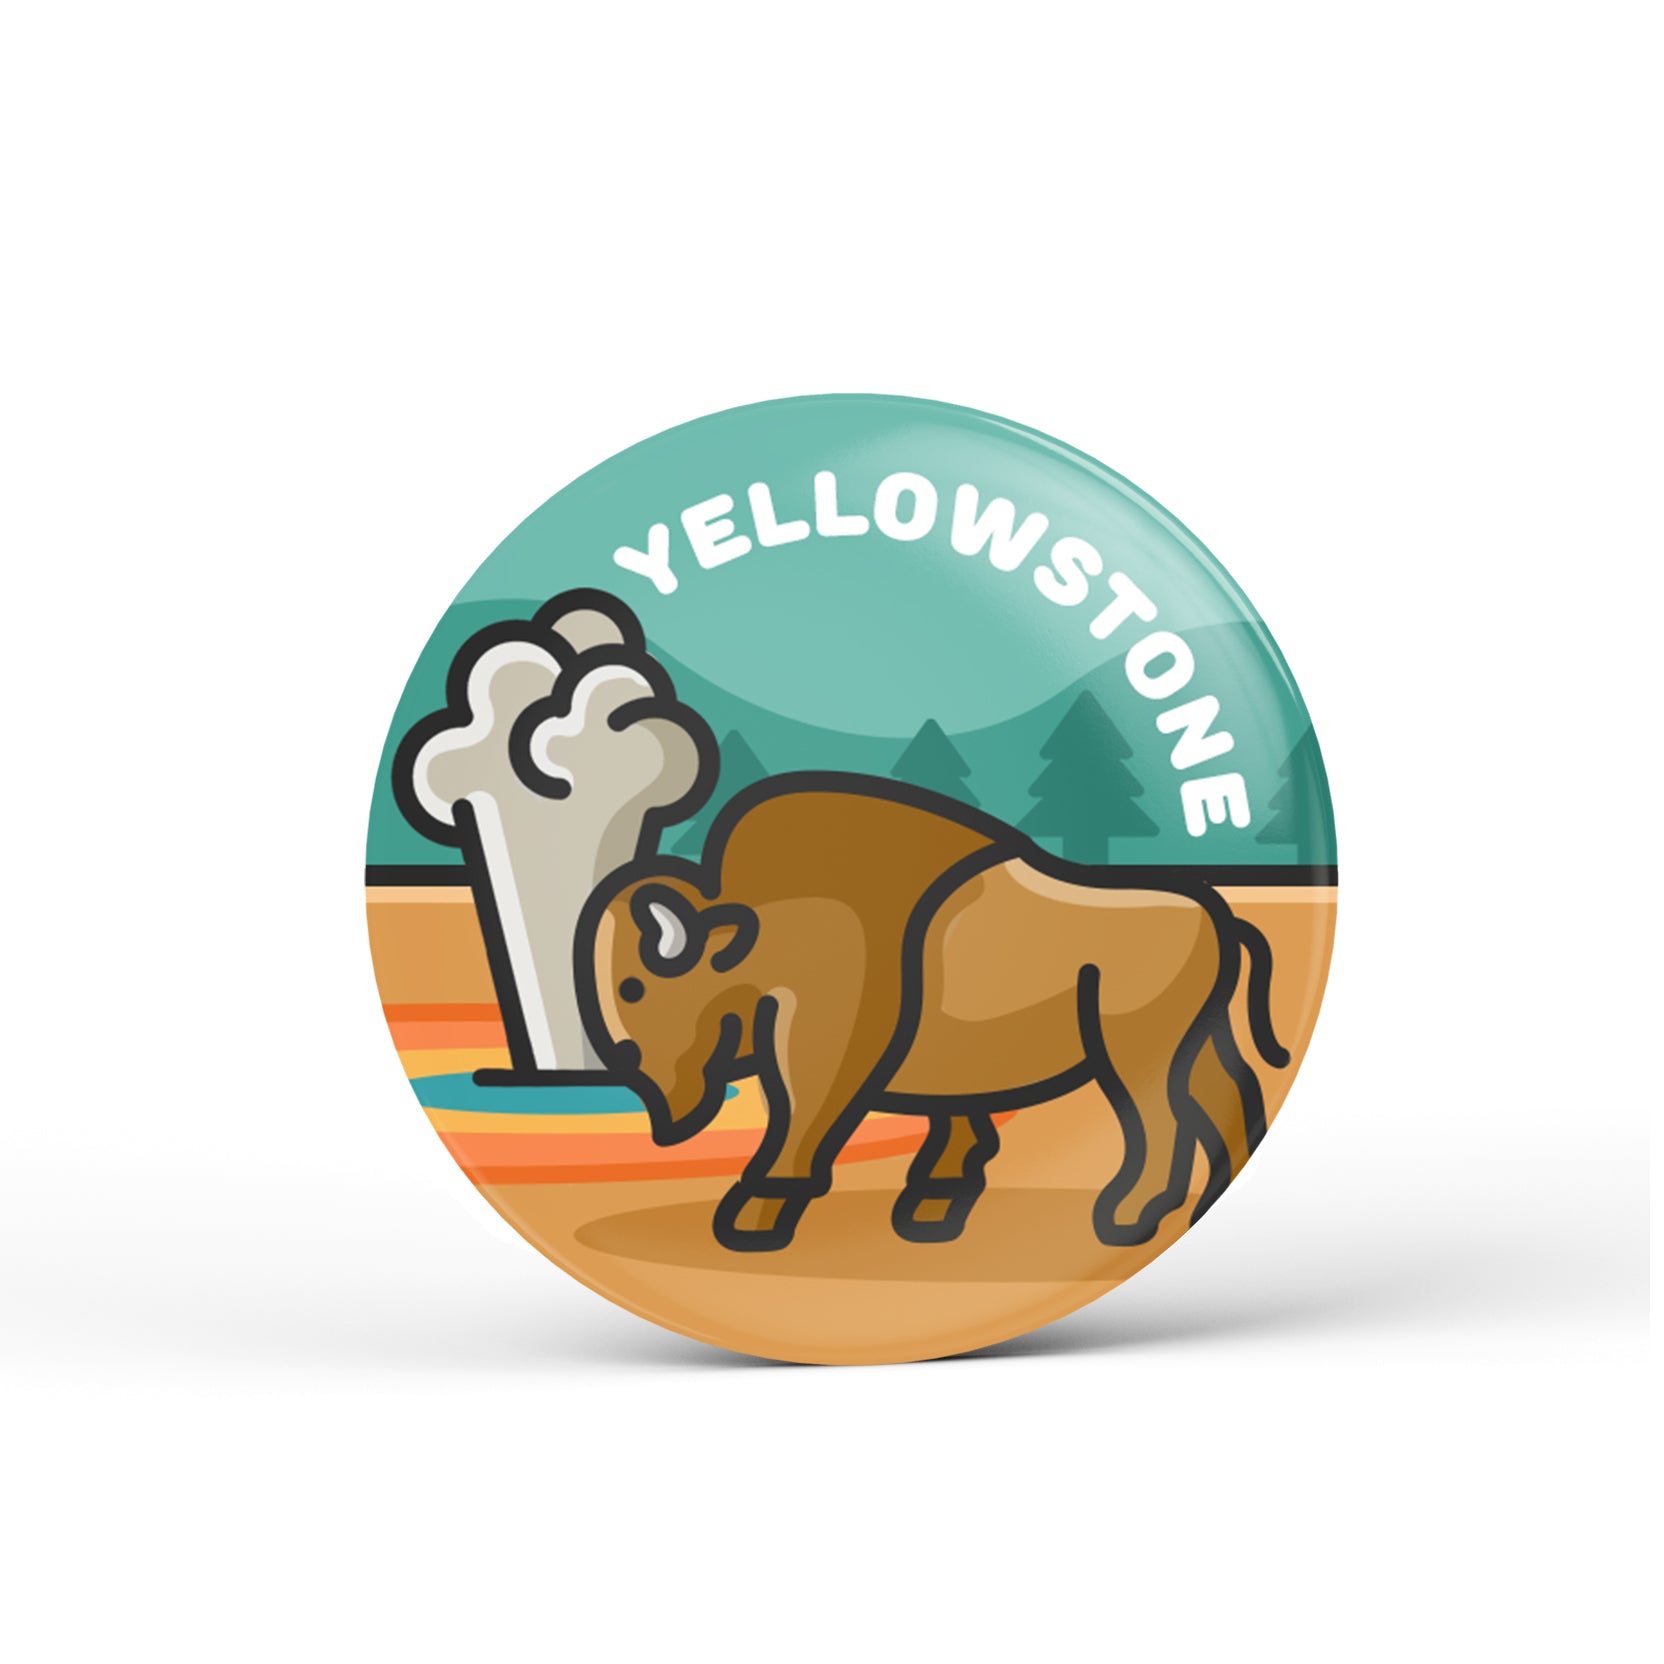 Yellowstone National Park Button